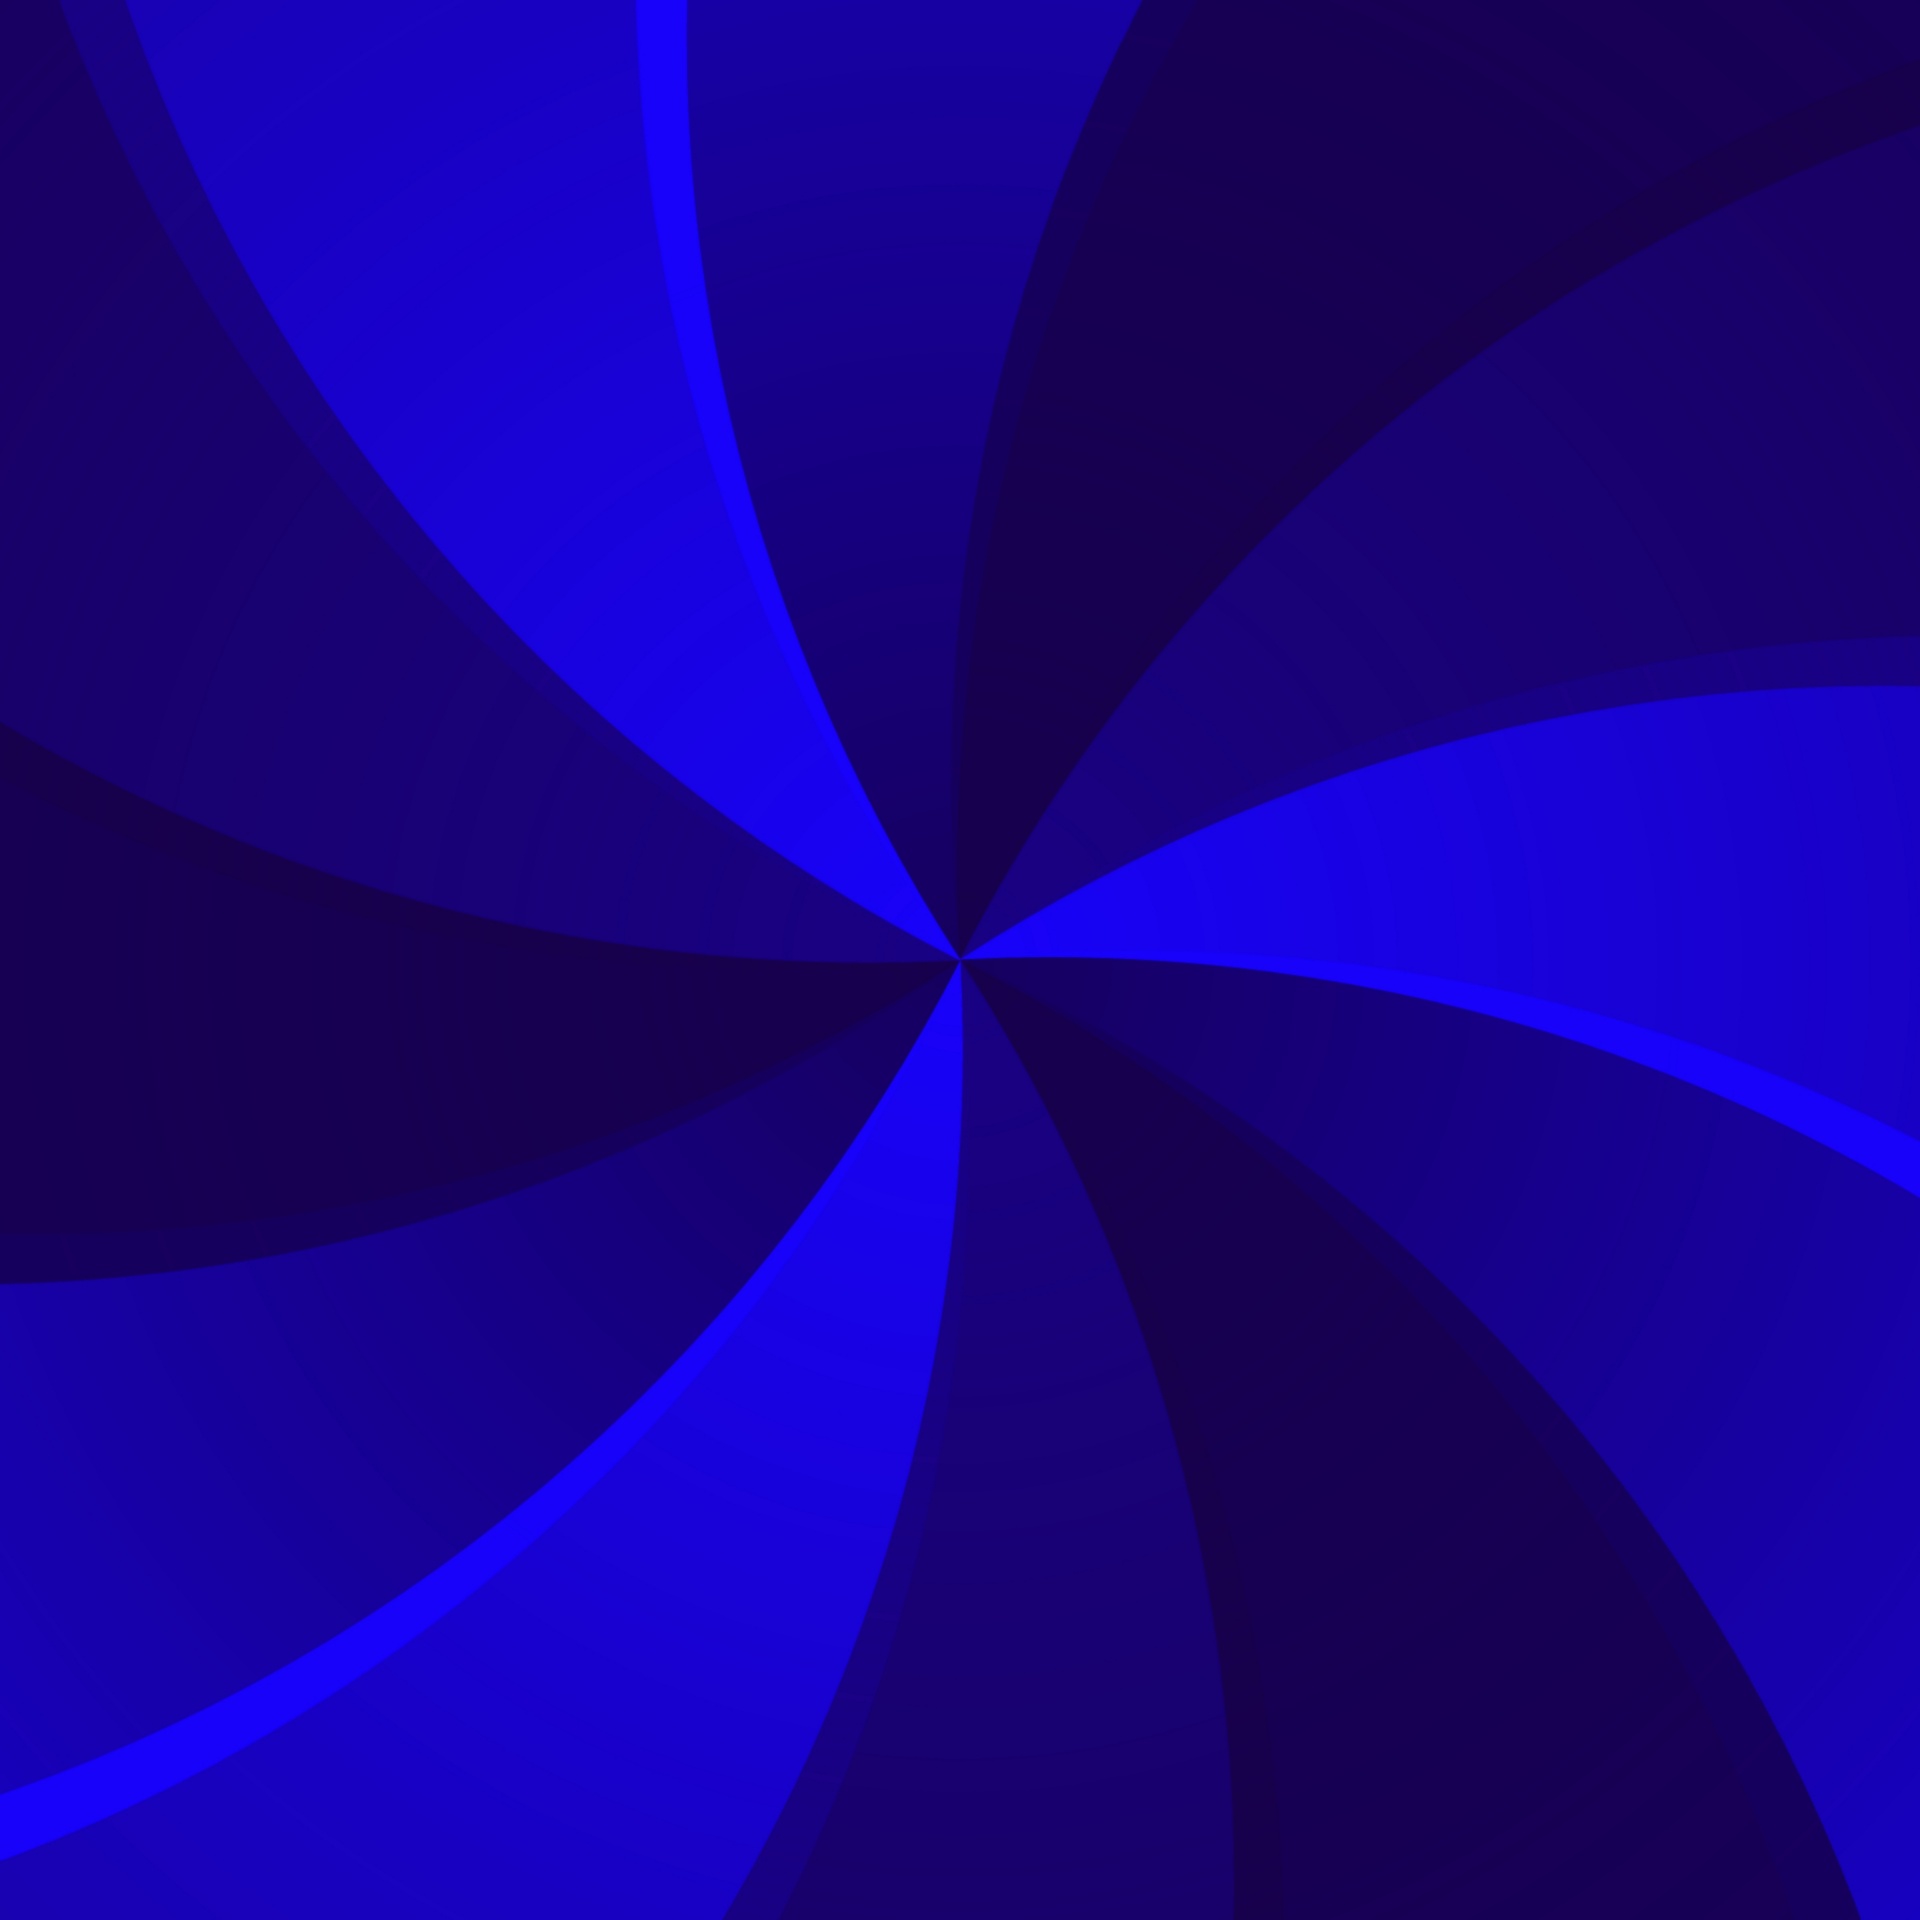 Wallpaper Blue Swirl Color Background Free Image From Needpix Com